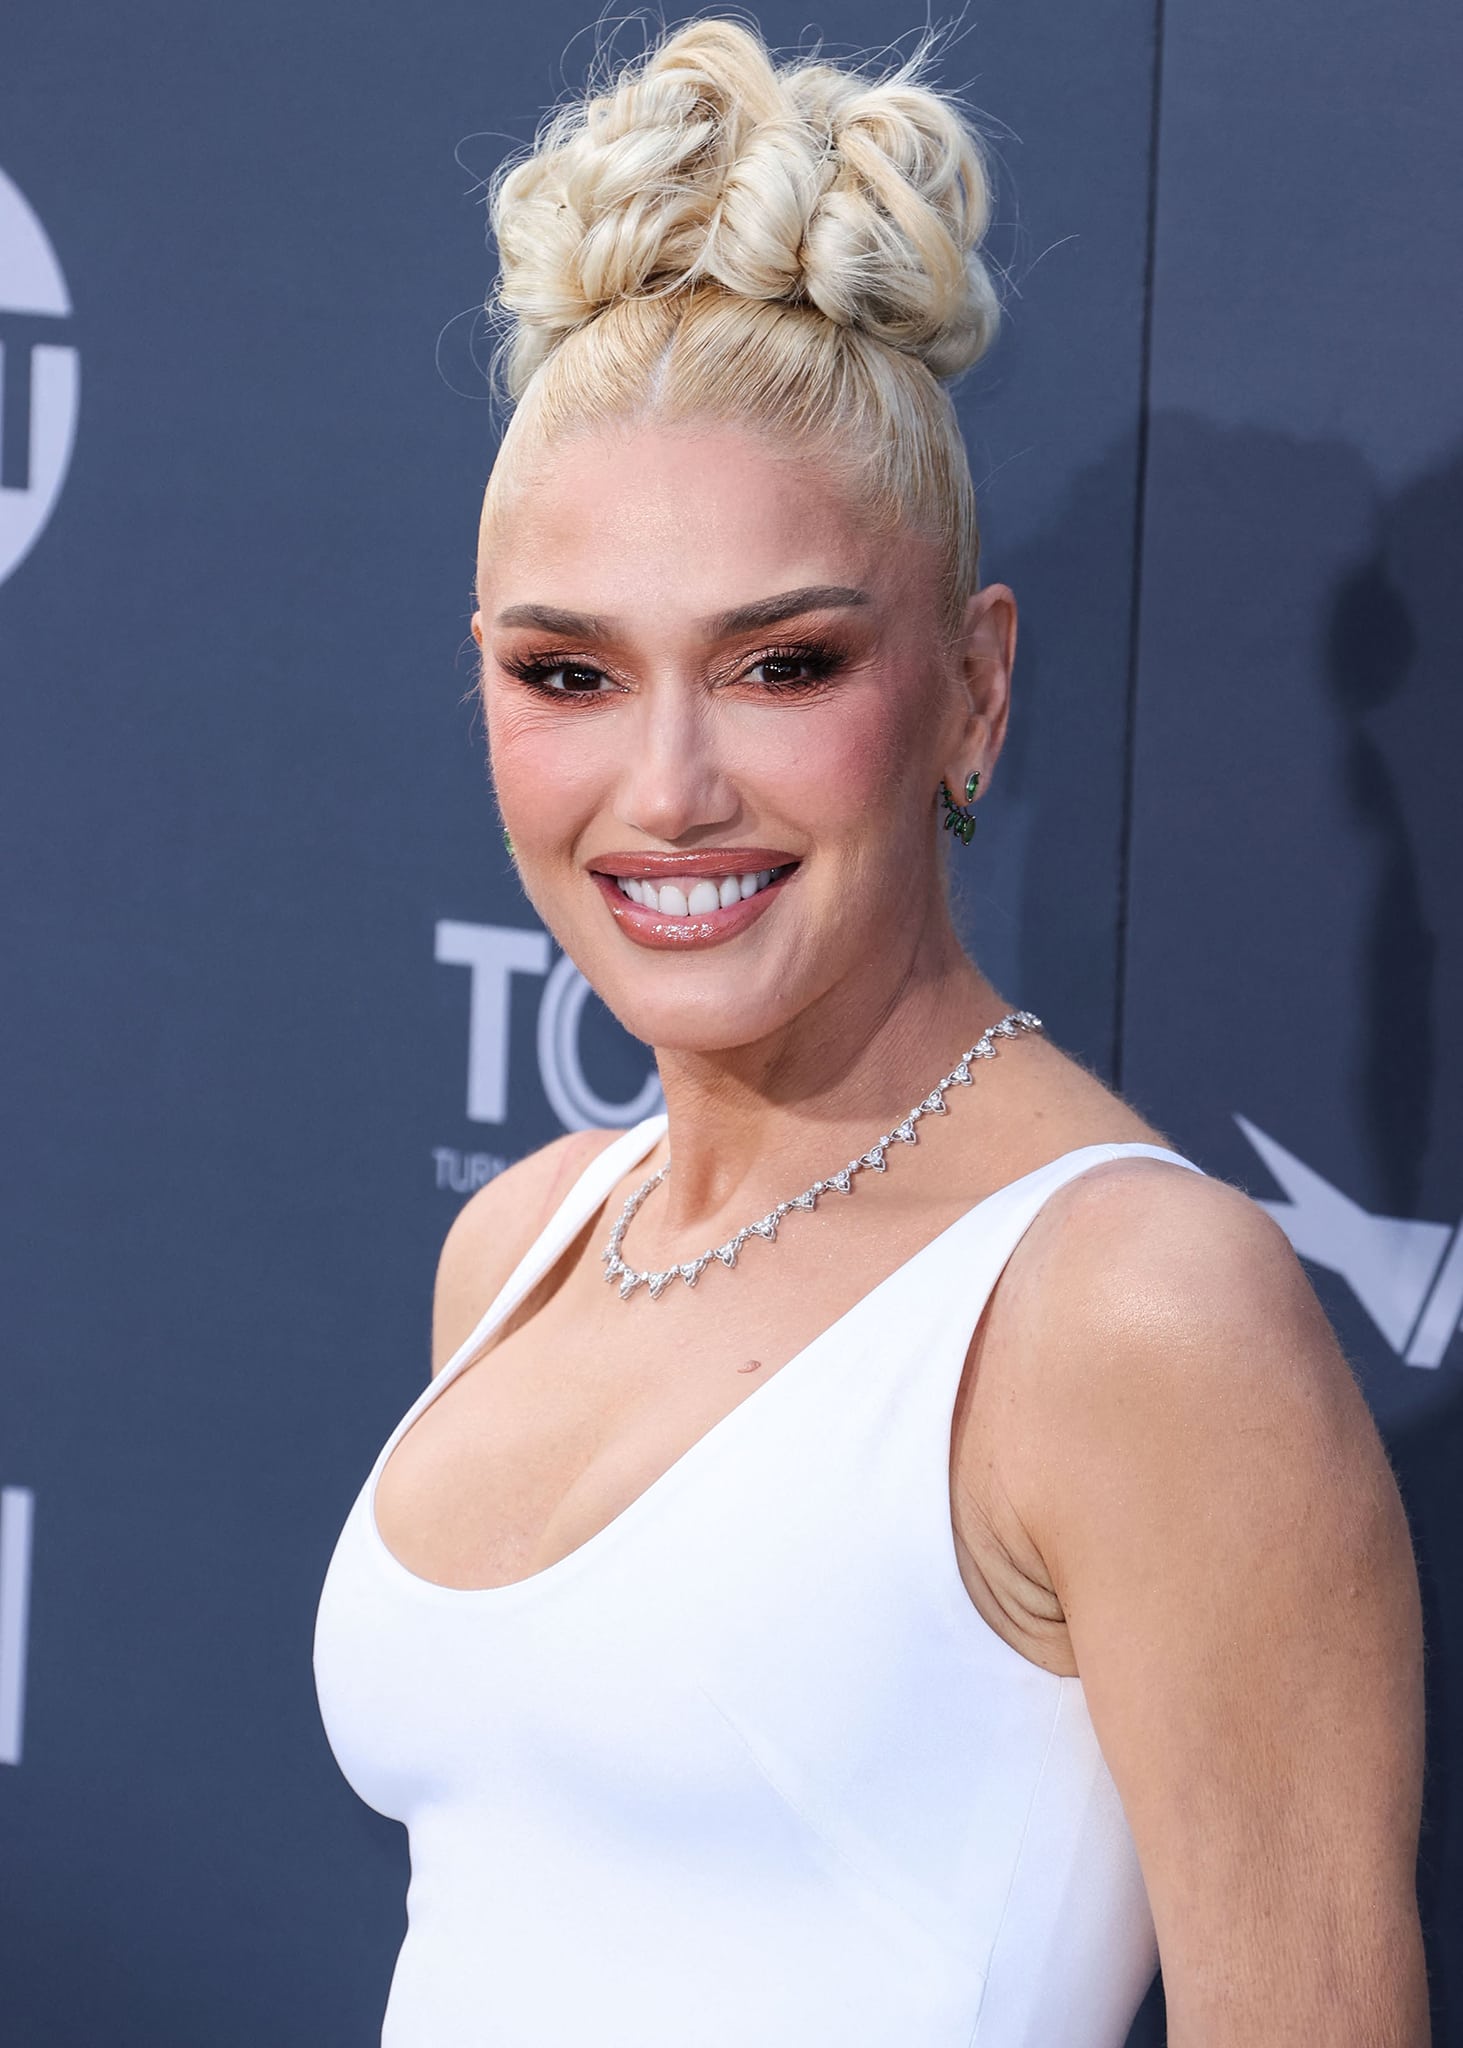 Gwen Stefani pulls her tresses up into a curled high bun and wears pink smokey eyeshadow with neutral lip gloss